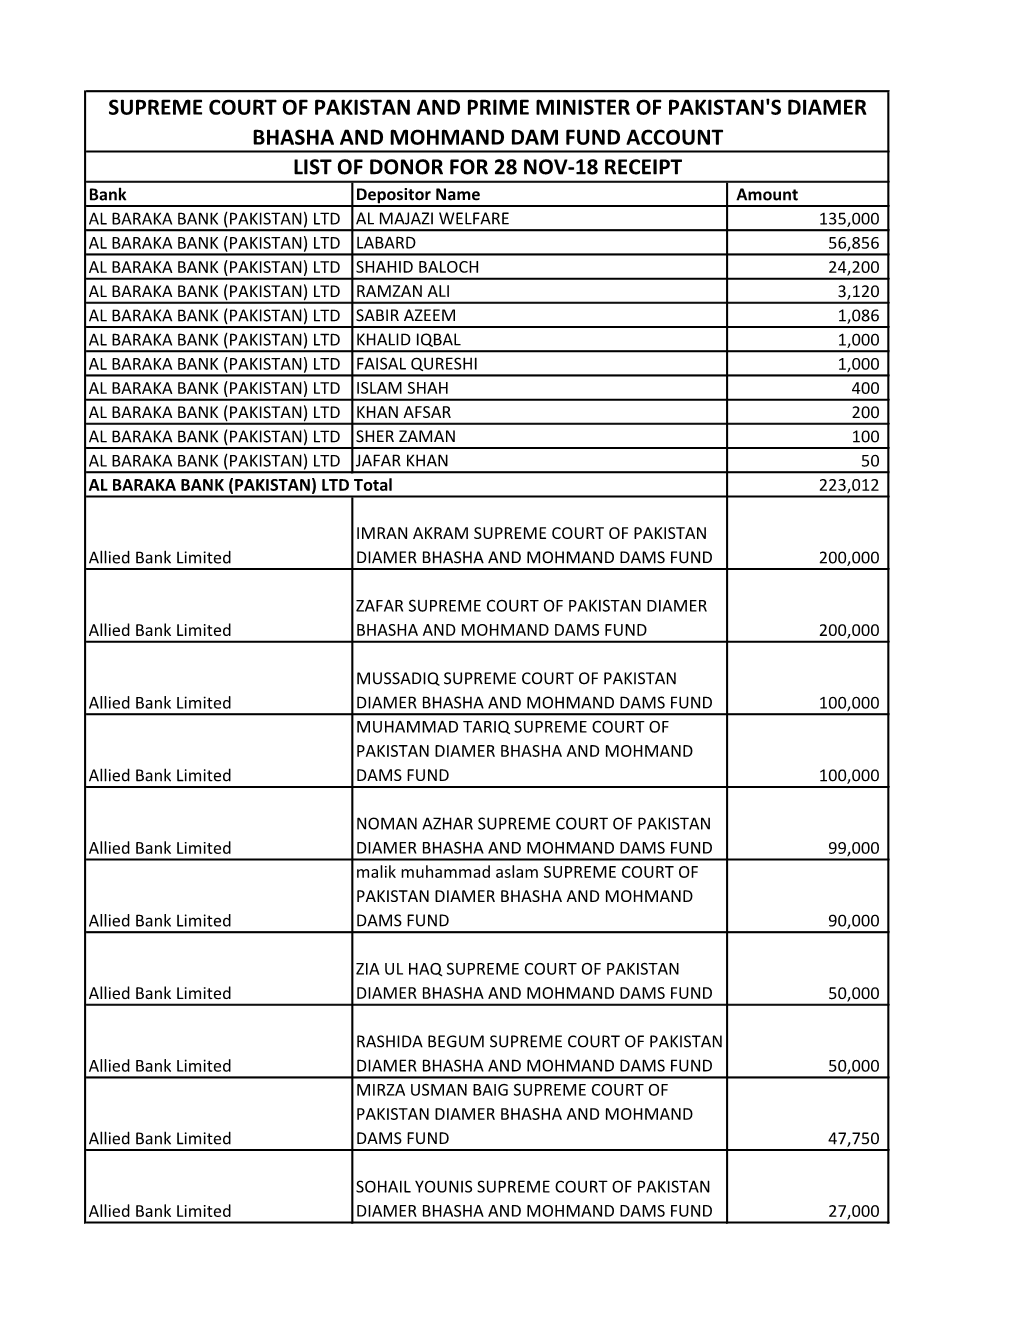 Supreme Court of Pakistan and Prime Minister of Pakistan's Diamer Bhasha and Mohmand Dam Fund Account List of Donor for 28 Nov-1